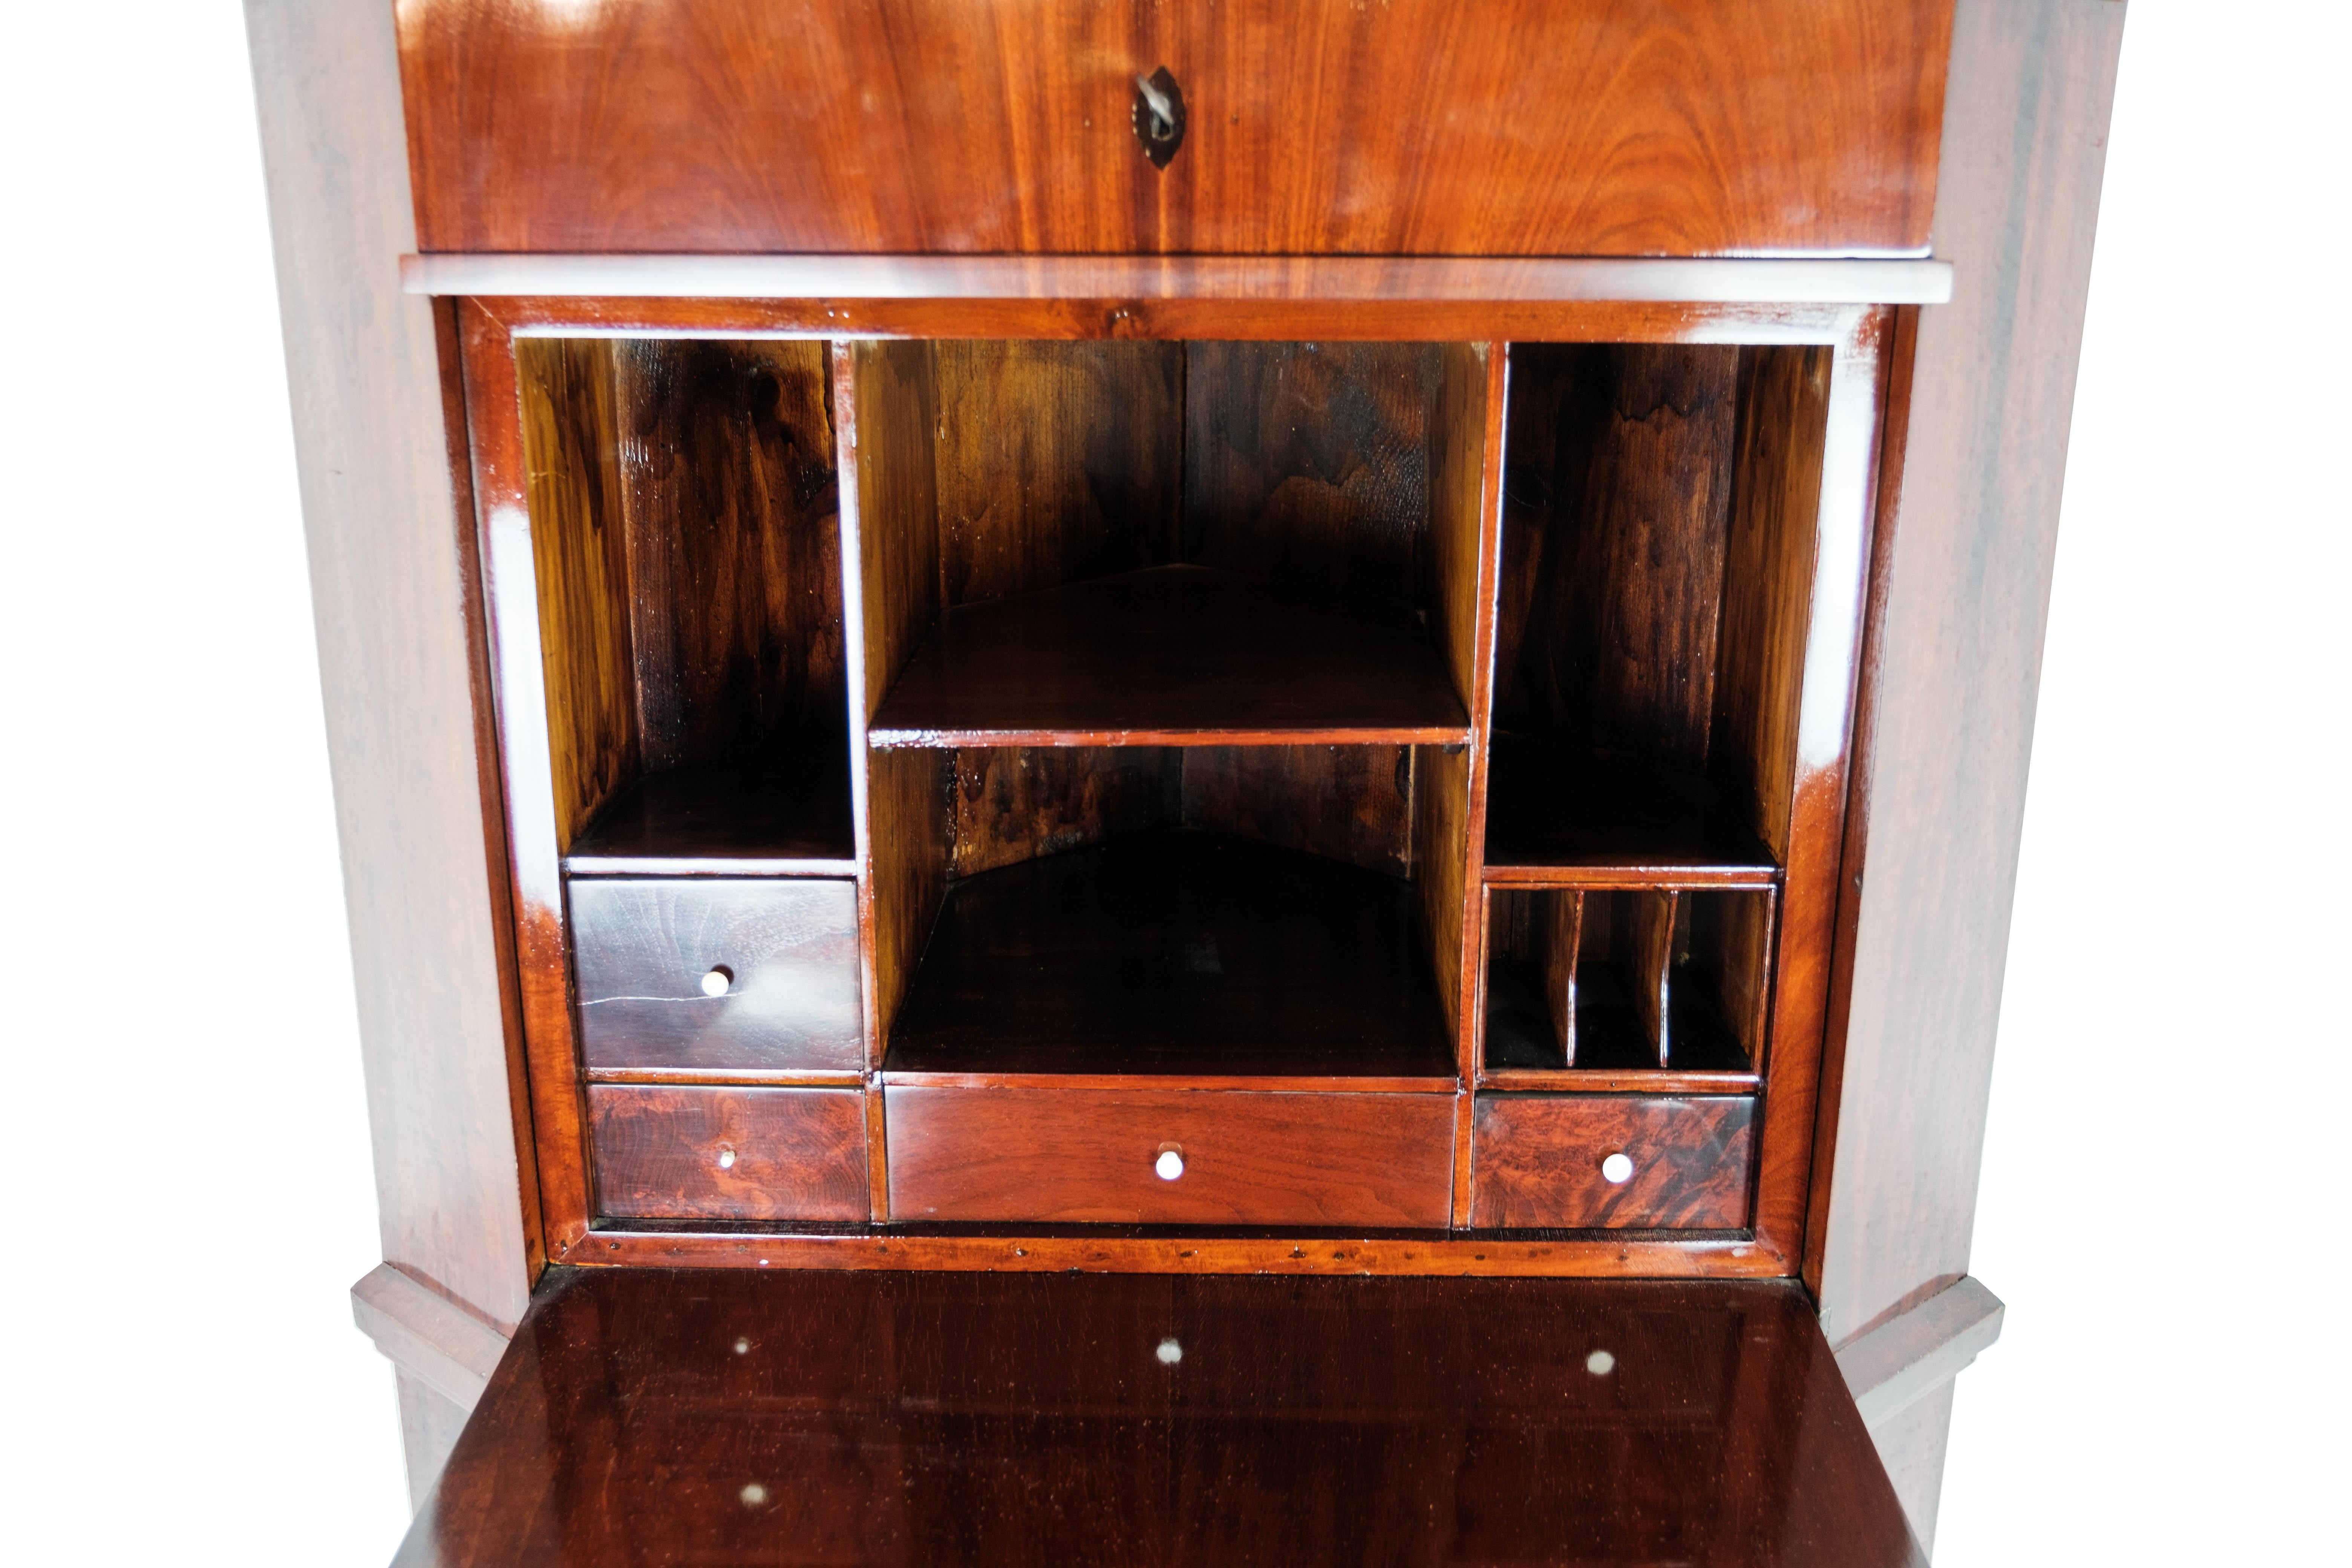 The tall corner cabinet/secretary in mahogany, in beautiful antique condition from the 1840s, is an impressive piece of furniture that exudes timeless elegance and historical charm.

The secretary, with its deep mahogany color and classic design, is